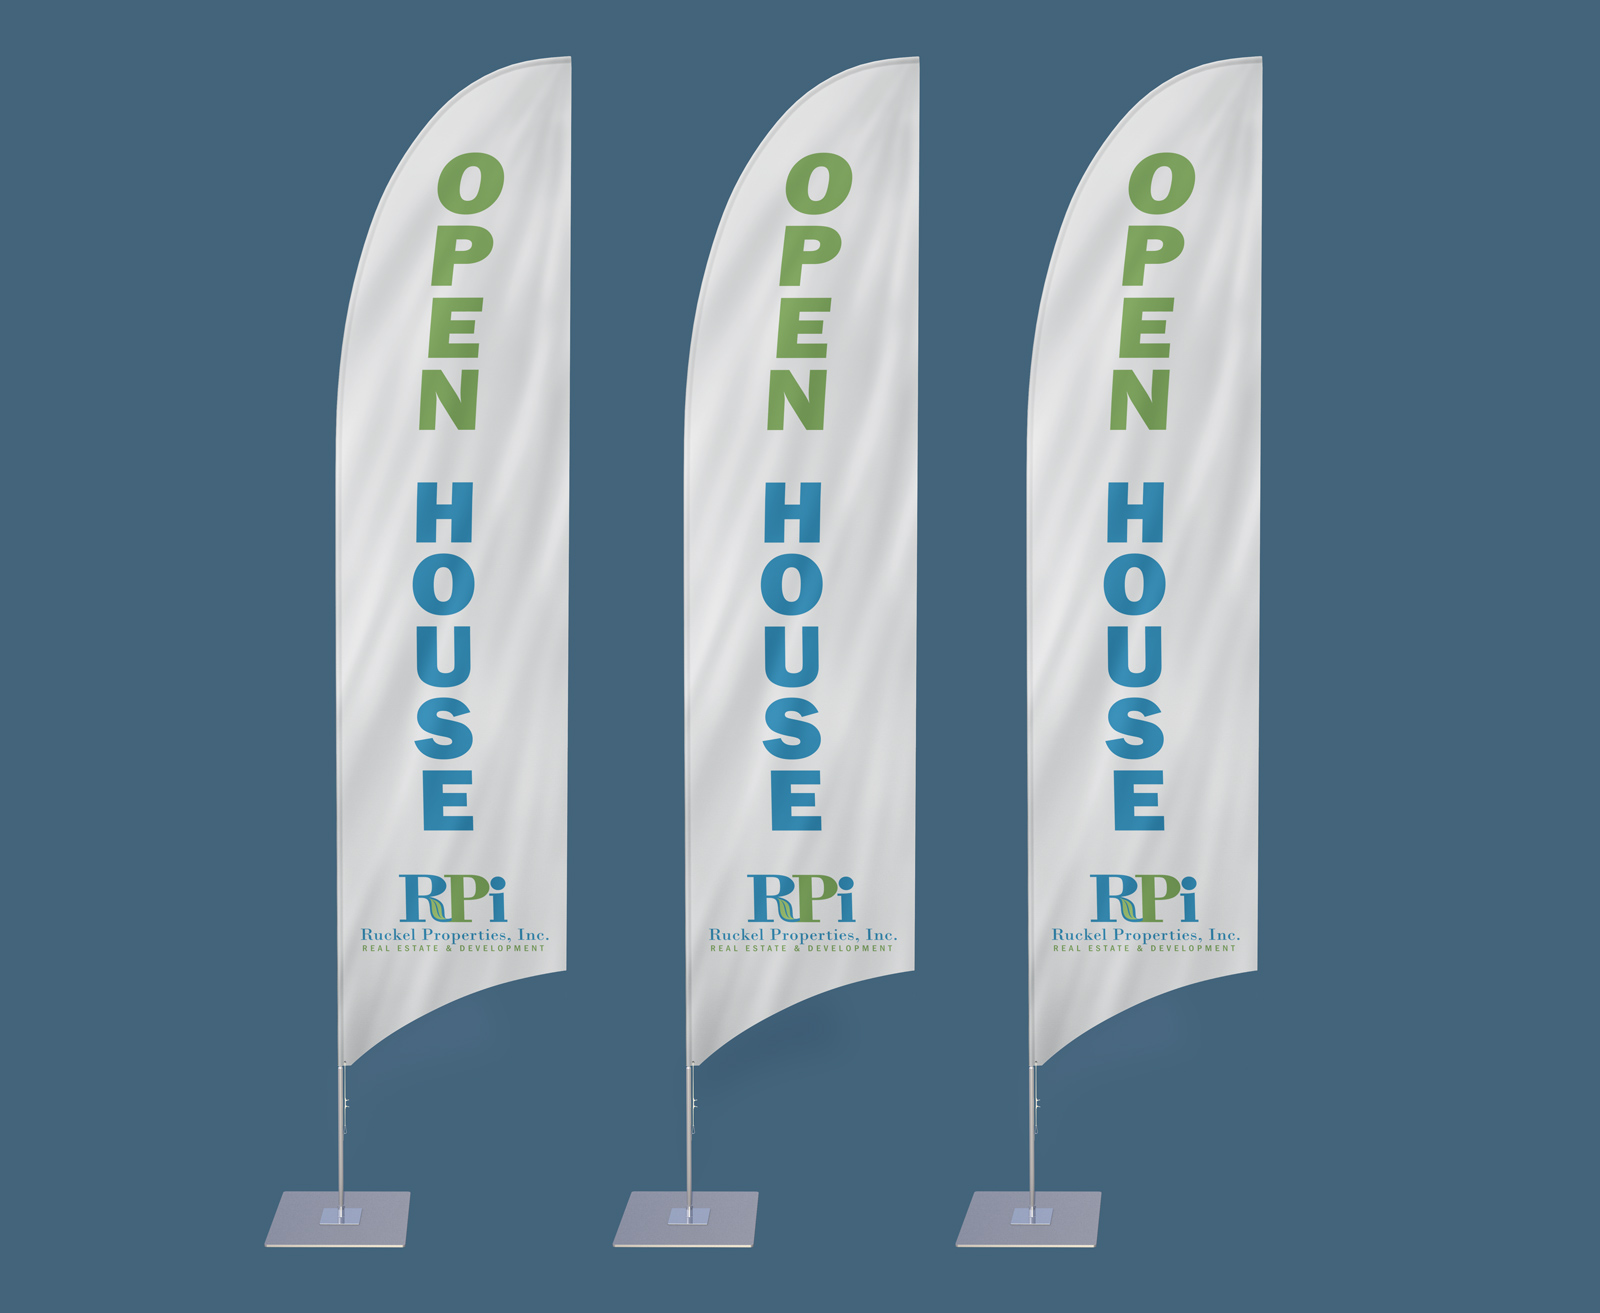 Outdoor open house feather flags for real estate development company